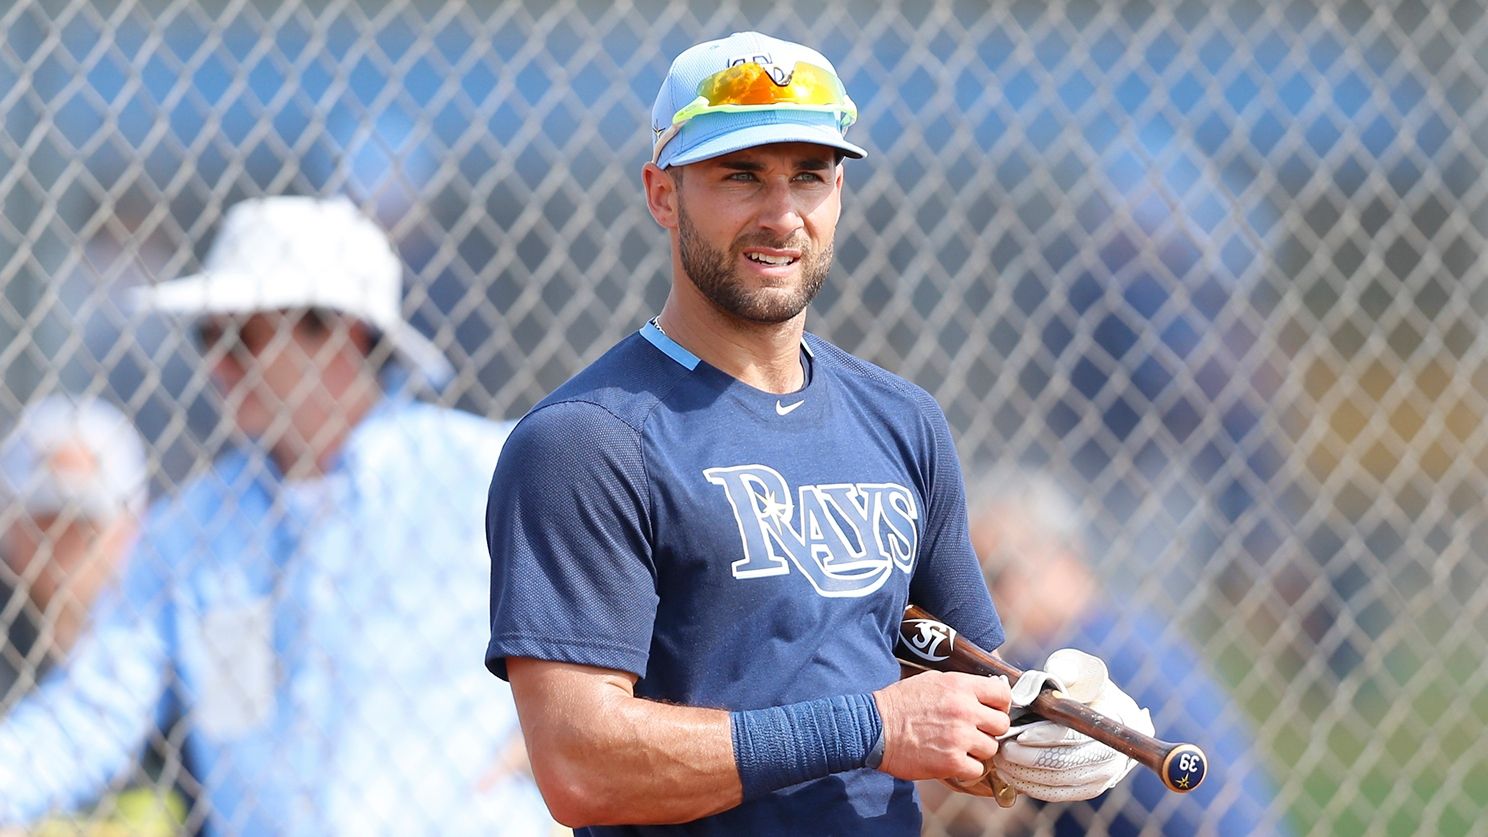 Tampa Bay Rays: Does a children's chant apply to Kevin Kiermaier's action?